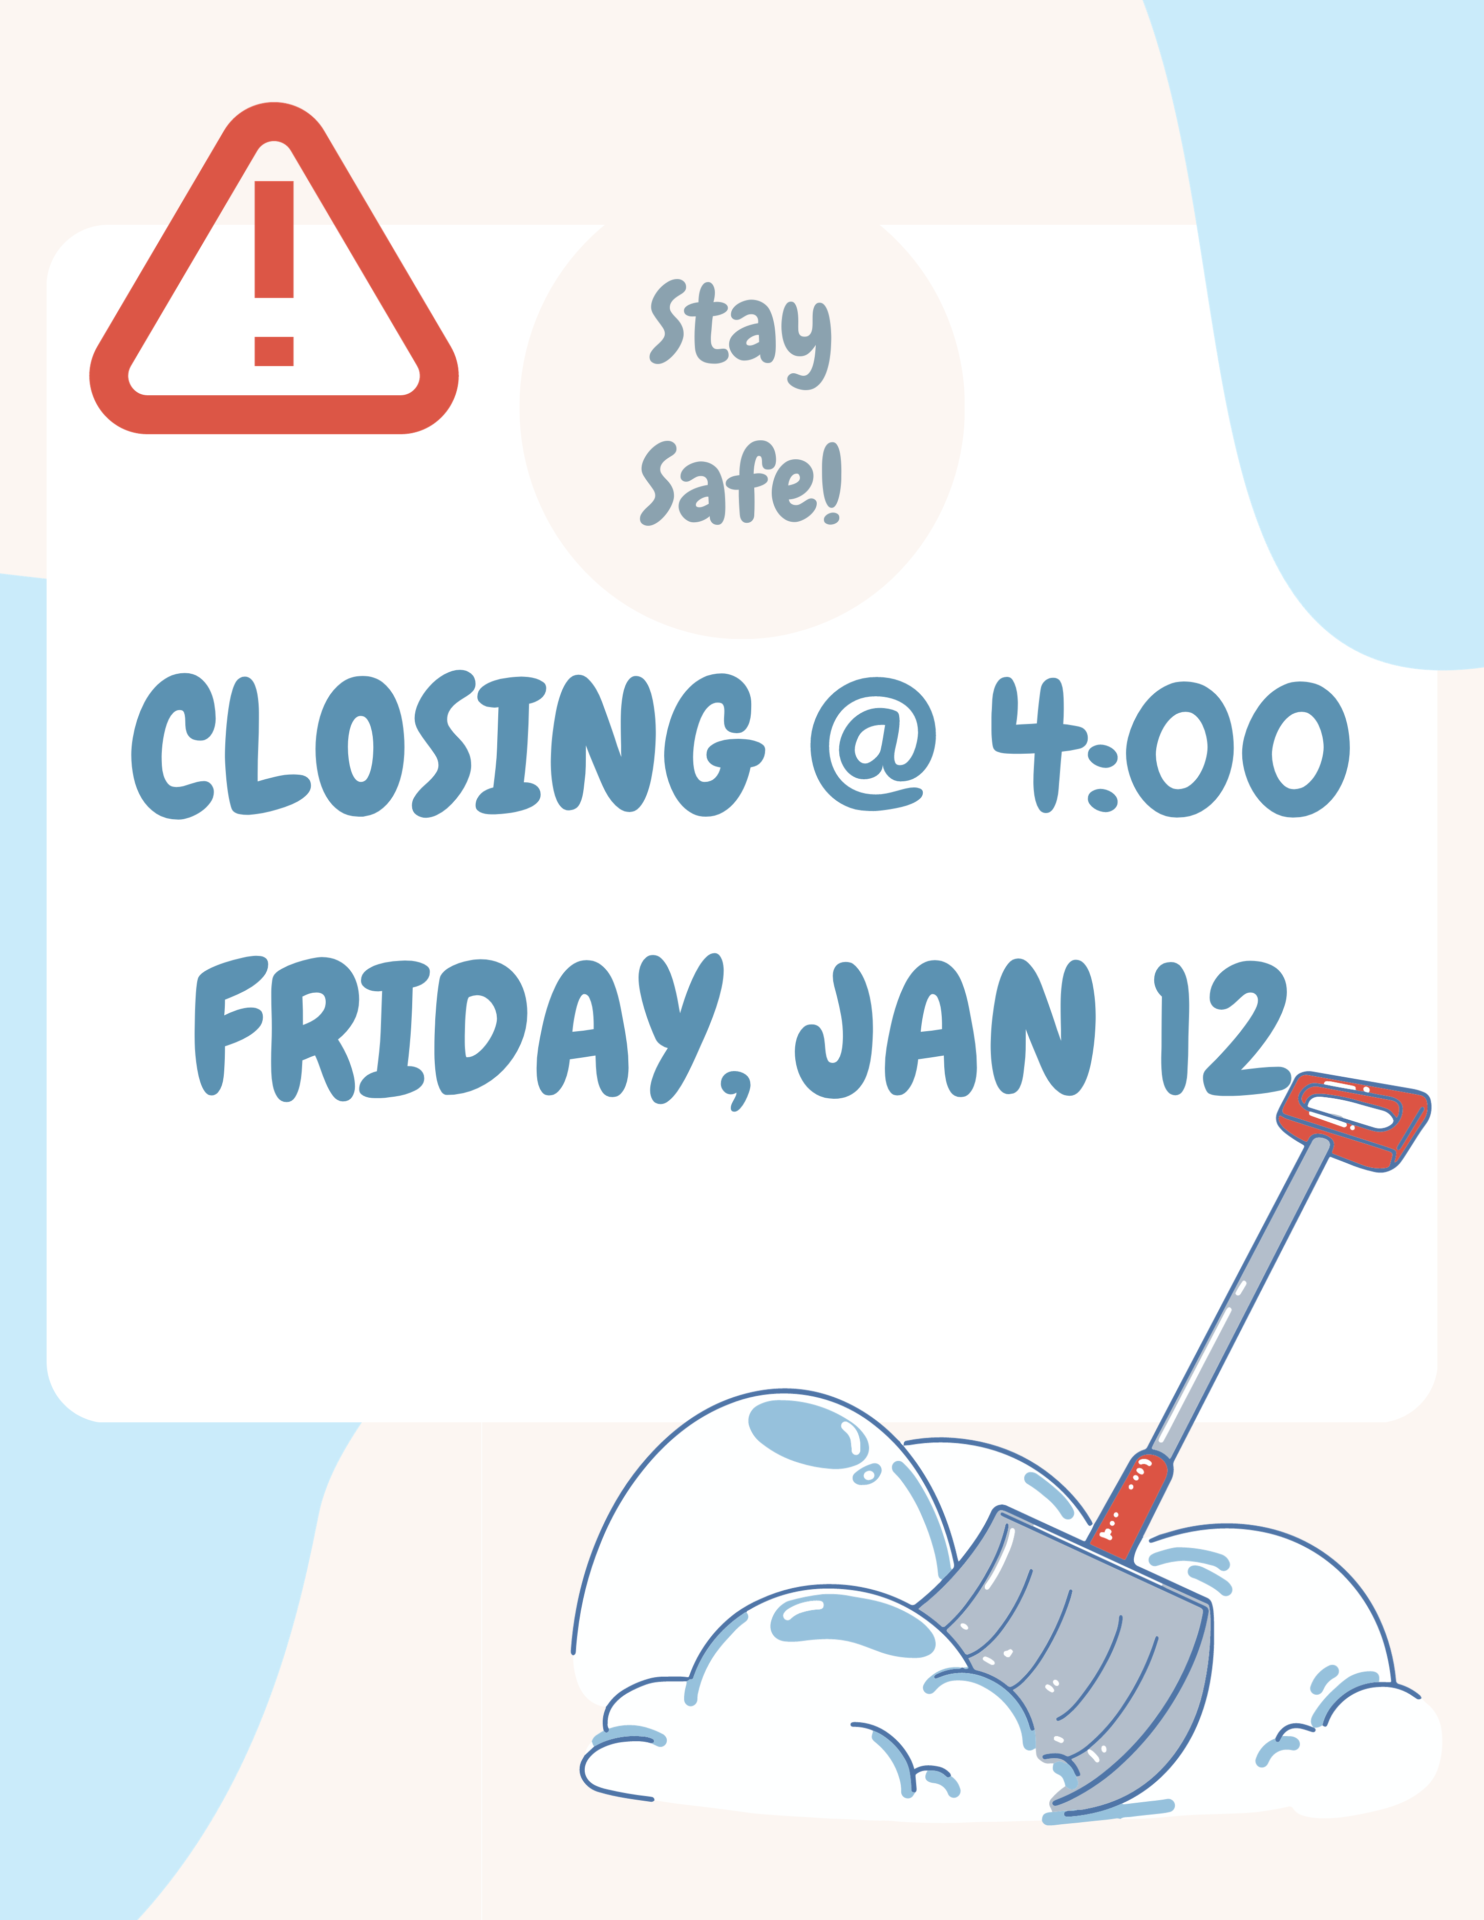 Library closing today @ 4:00 (January 12th)